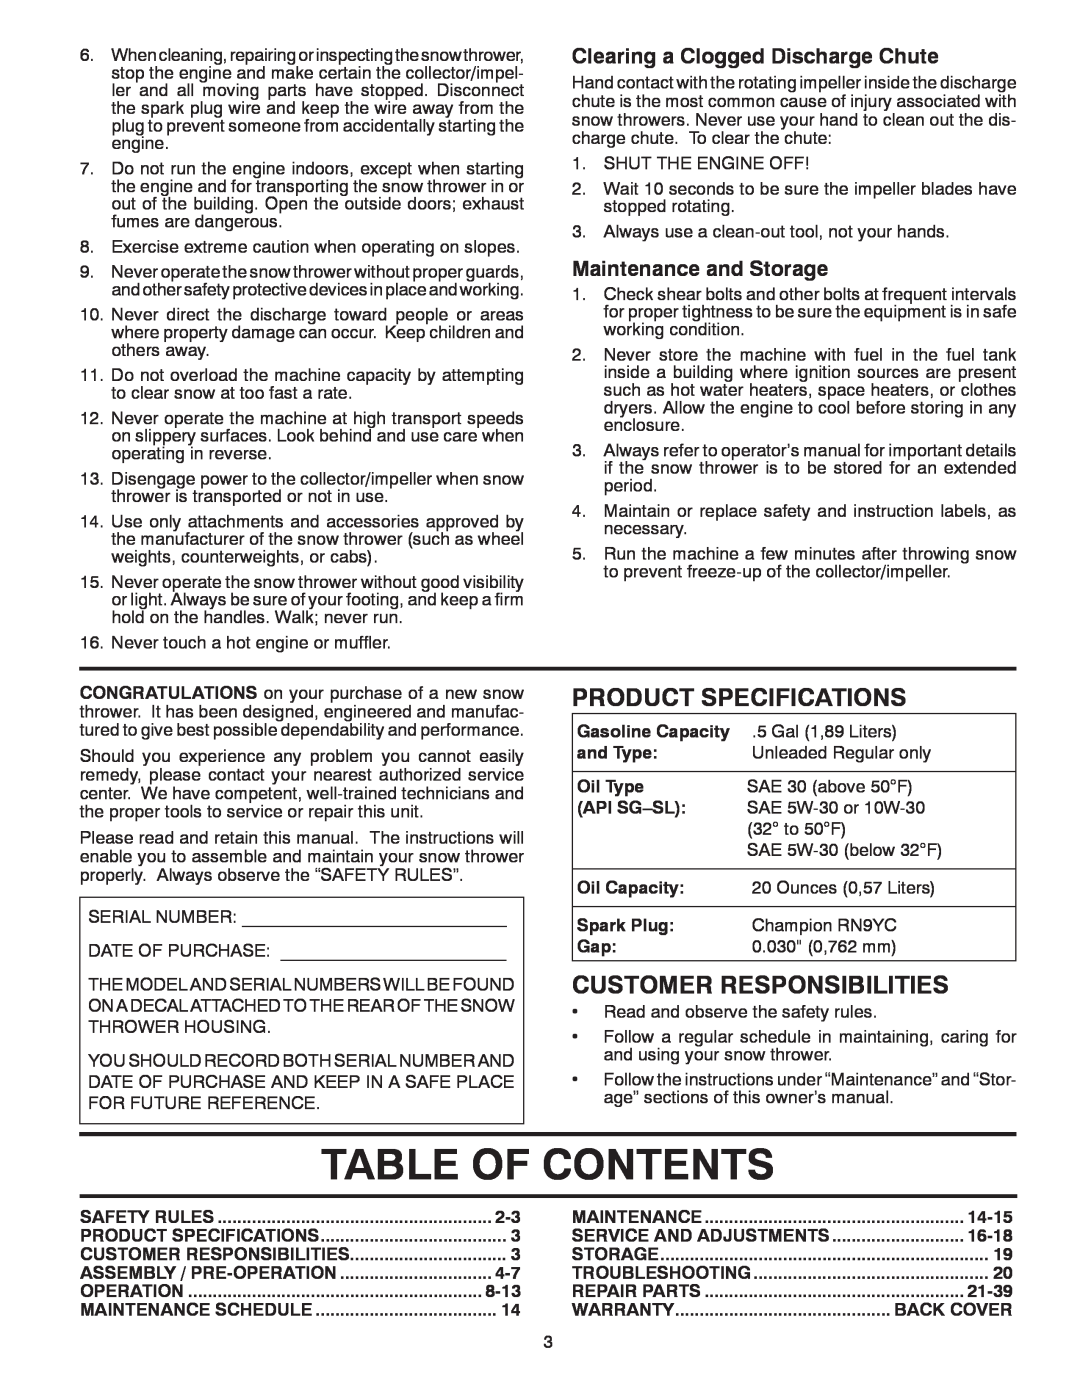 Poulan 429956 Table Of Contents, Product Specifications, Customer Responsibilities, Clearing a Clogged Discharge Chute 